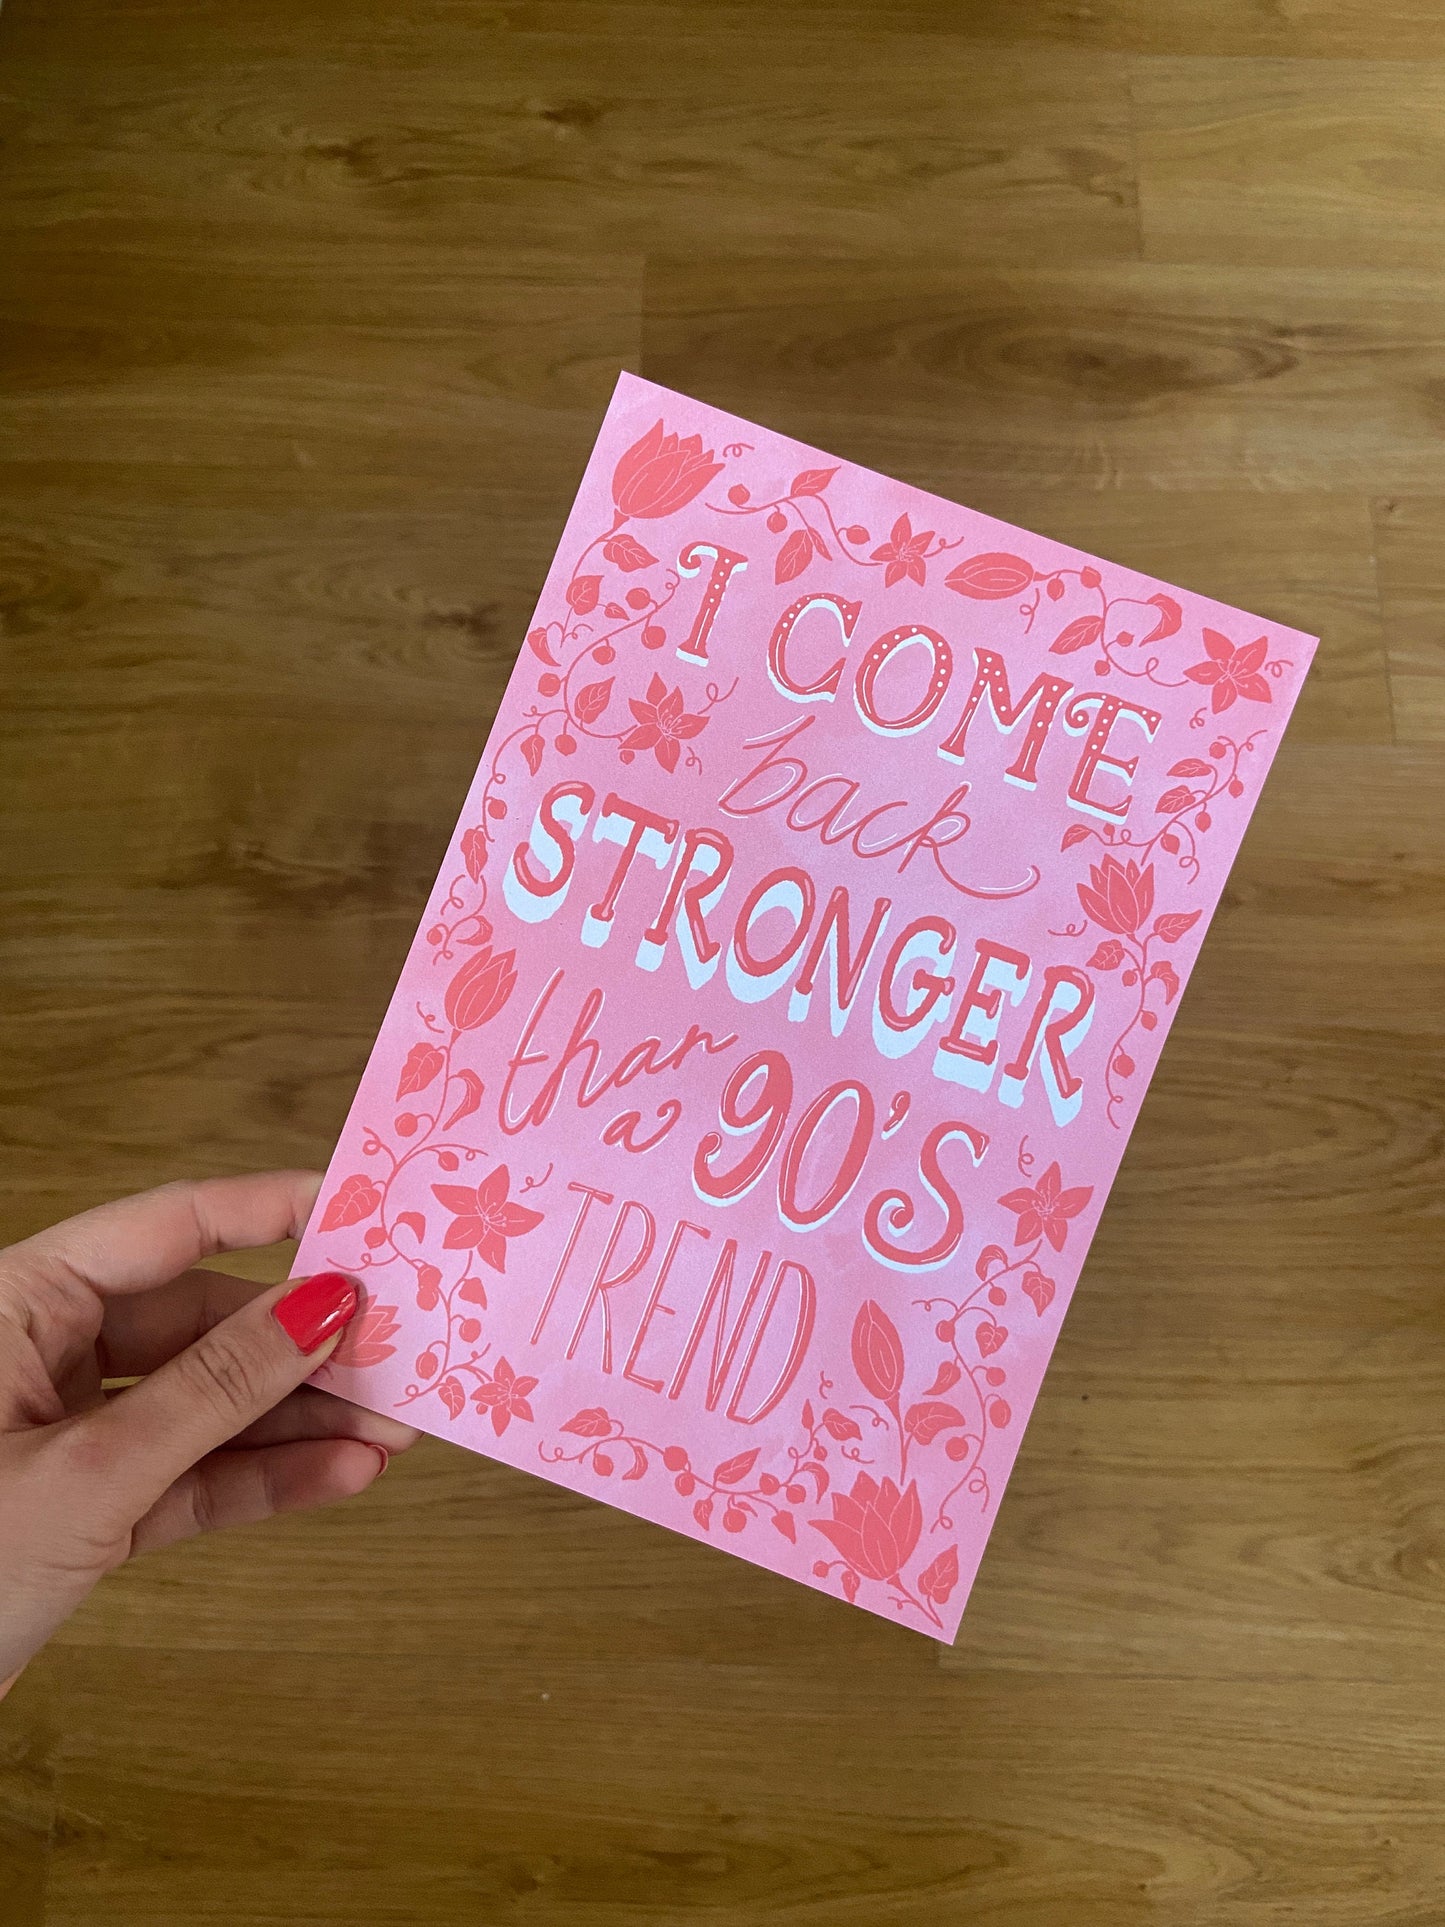 I Come Back Stronger Than a 90’s Trend postcard, Taylor swift Willow Quote, chinoiserie floral print, vintage print artwork in the U.K.